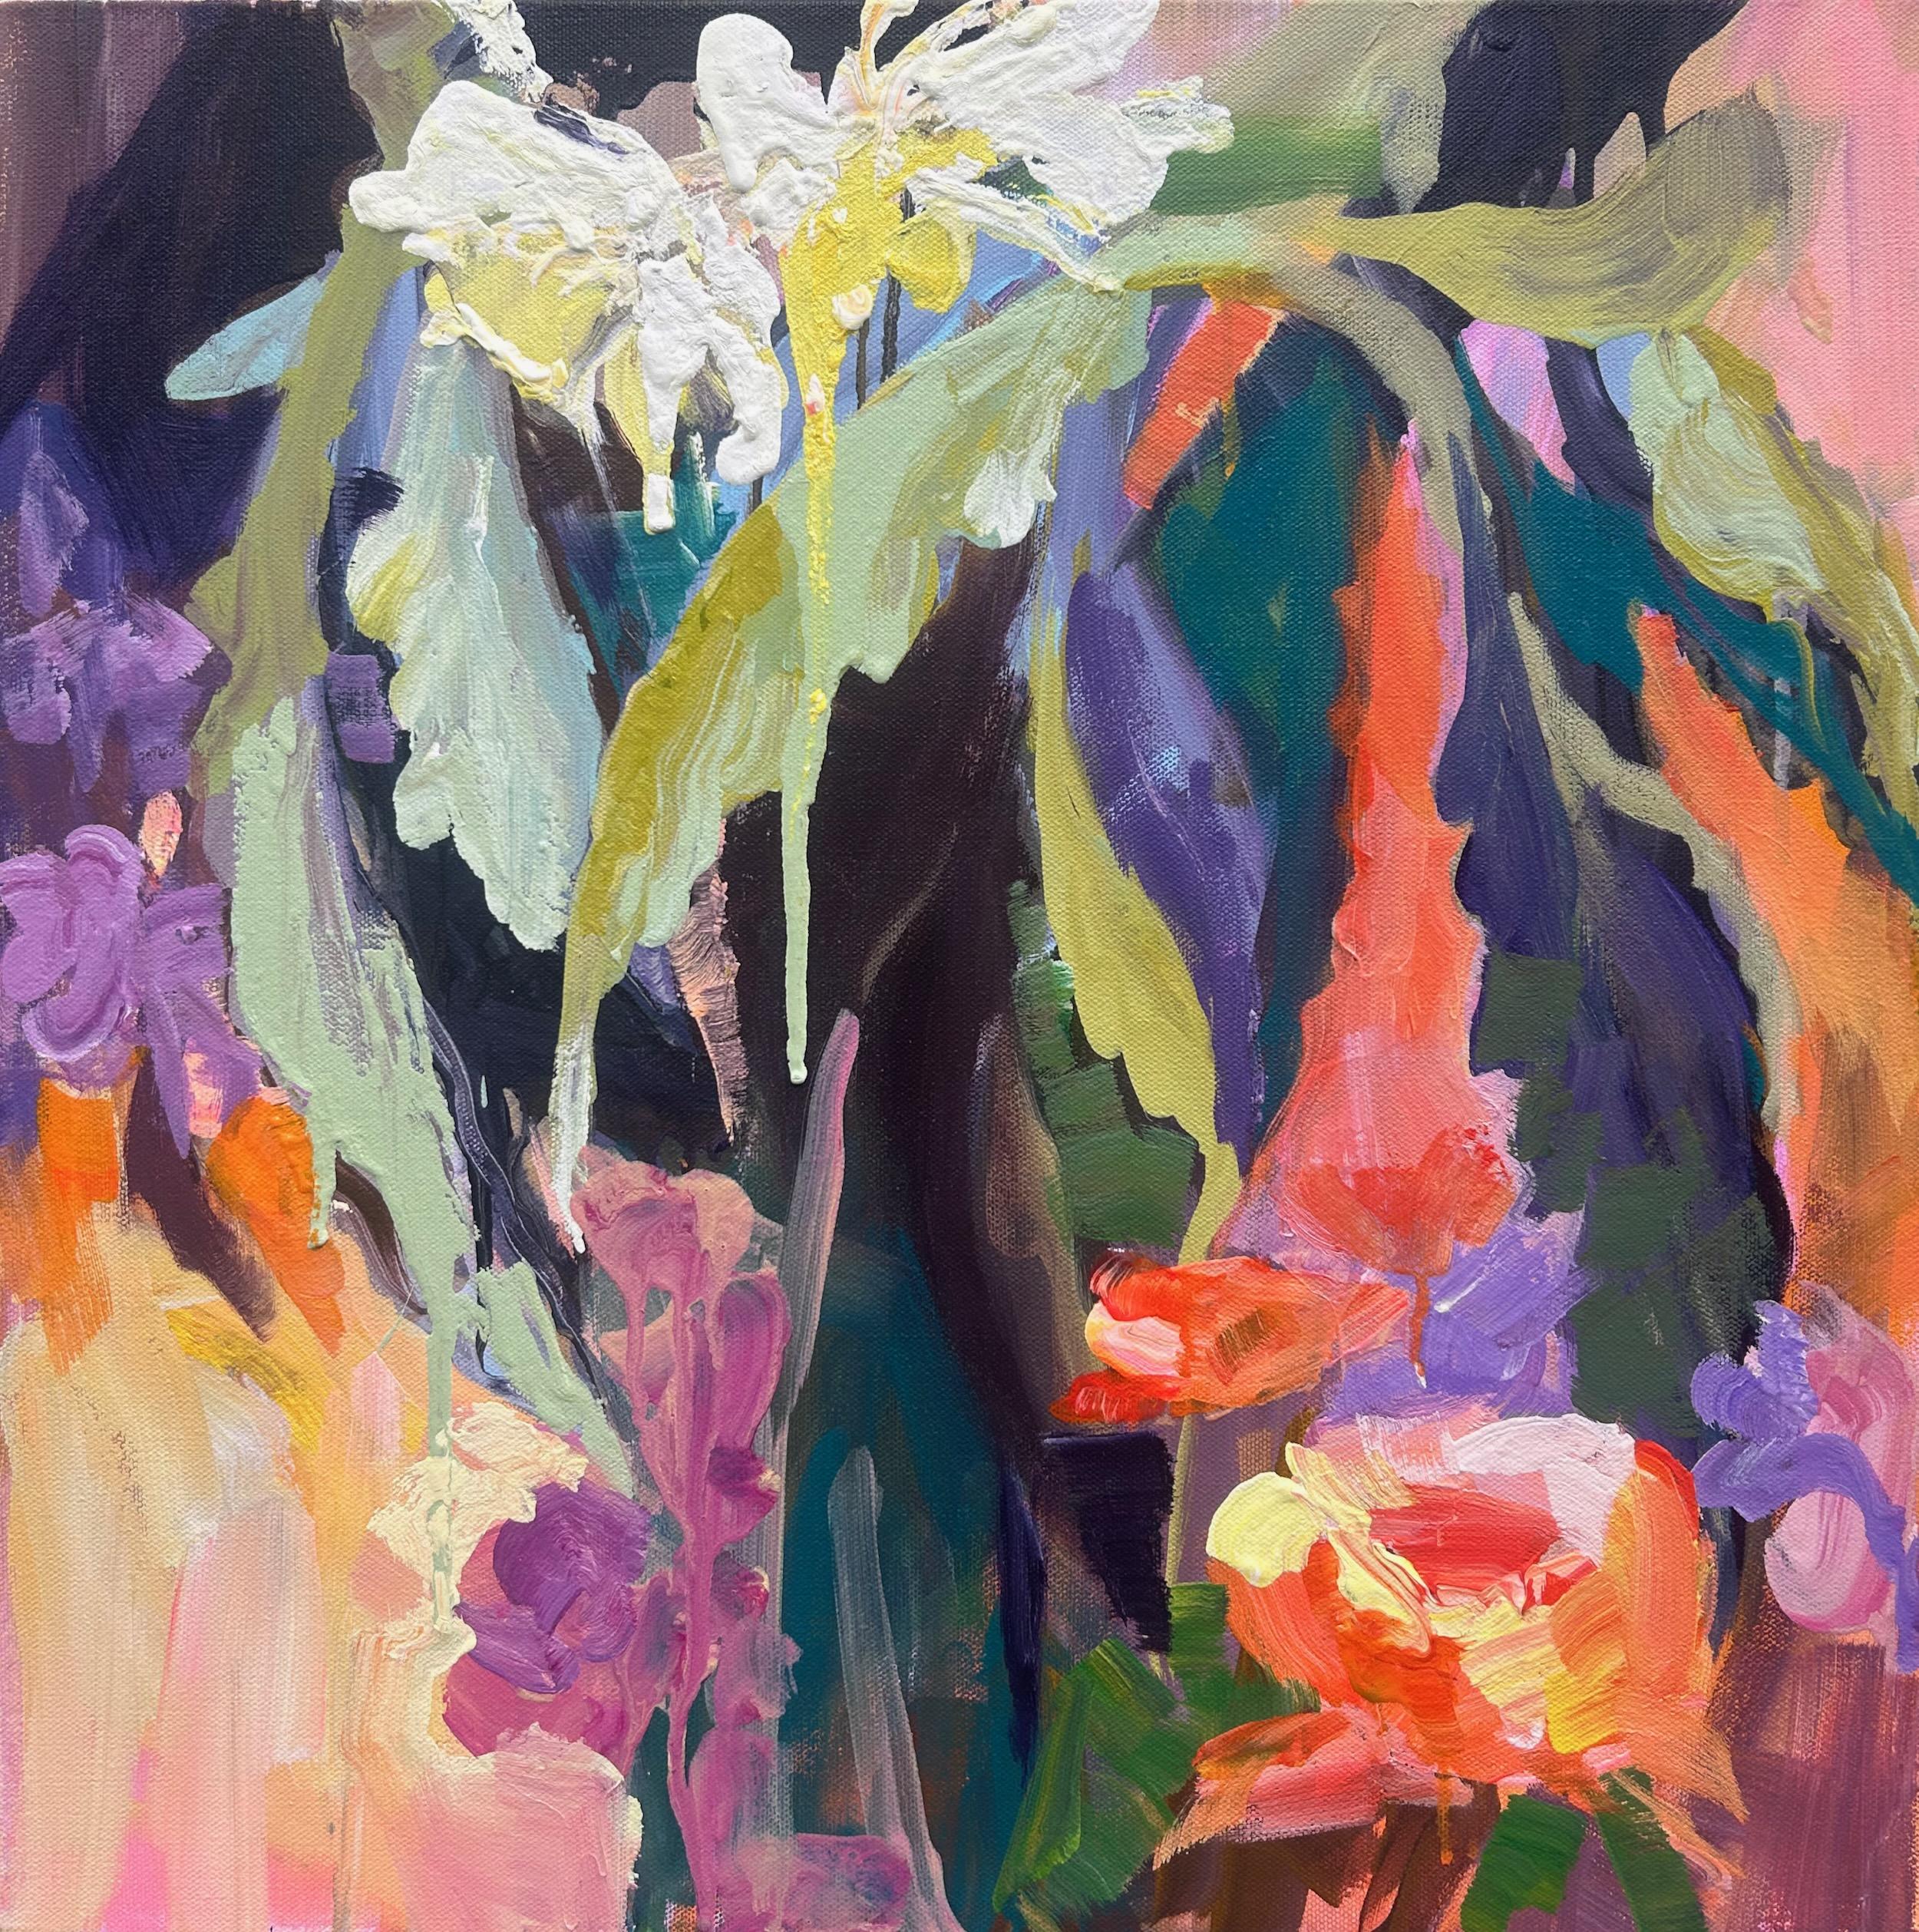 <p>Artist Comments<br>Artist Julia Hacker displays enticing abstraction of floral forms that blend the elements of fauvist landscapes and naturalistic plein-air scenes. The harmony between organic shapes and the vibrant hues of magenta, orange, and